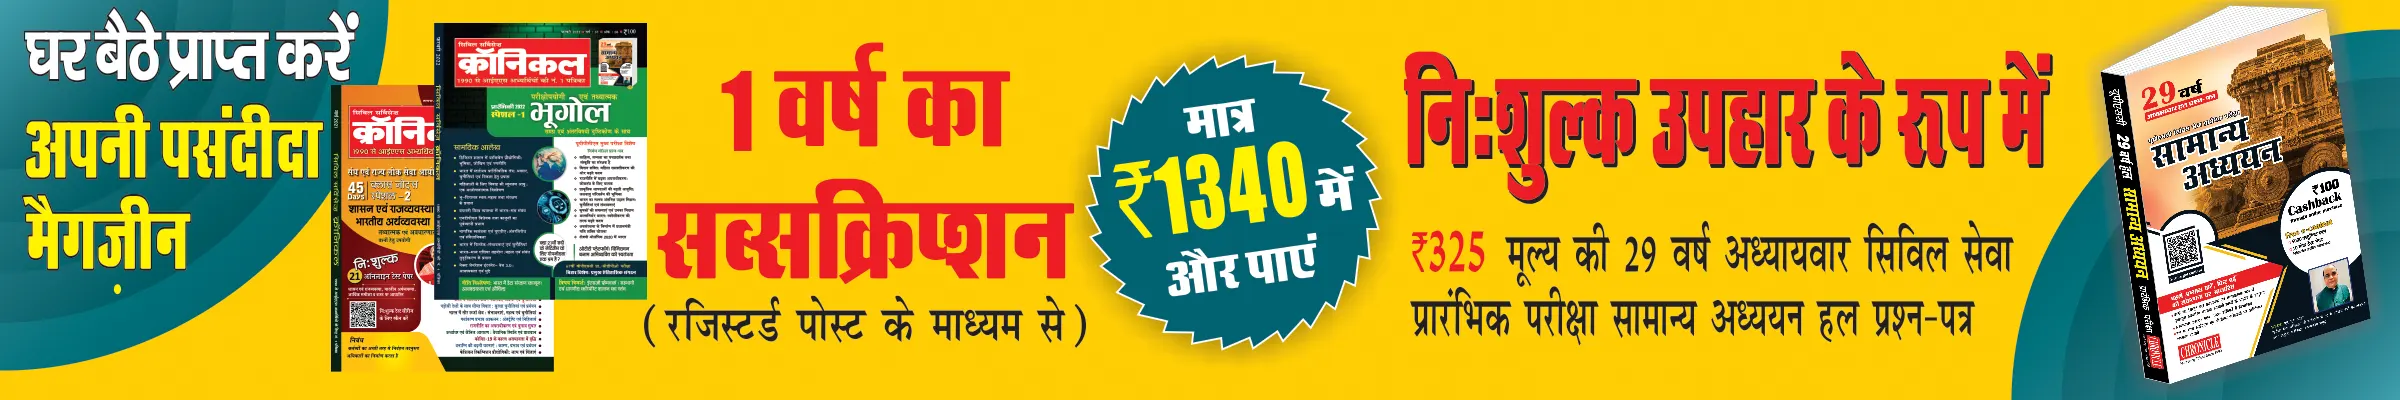 Civil Services Chronicle Hindi One Year Subscription With 29 Years Solved Paper @ Rs.1340/-